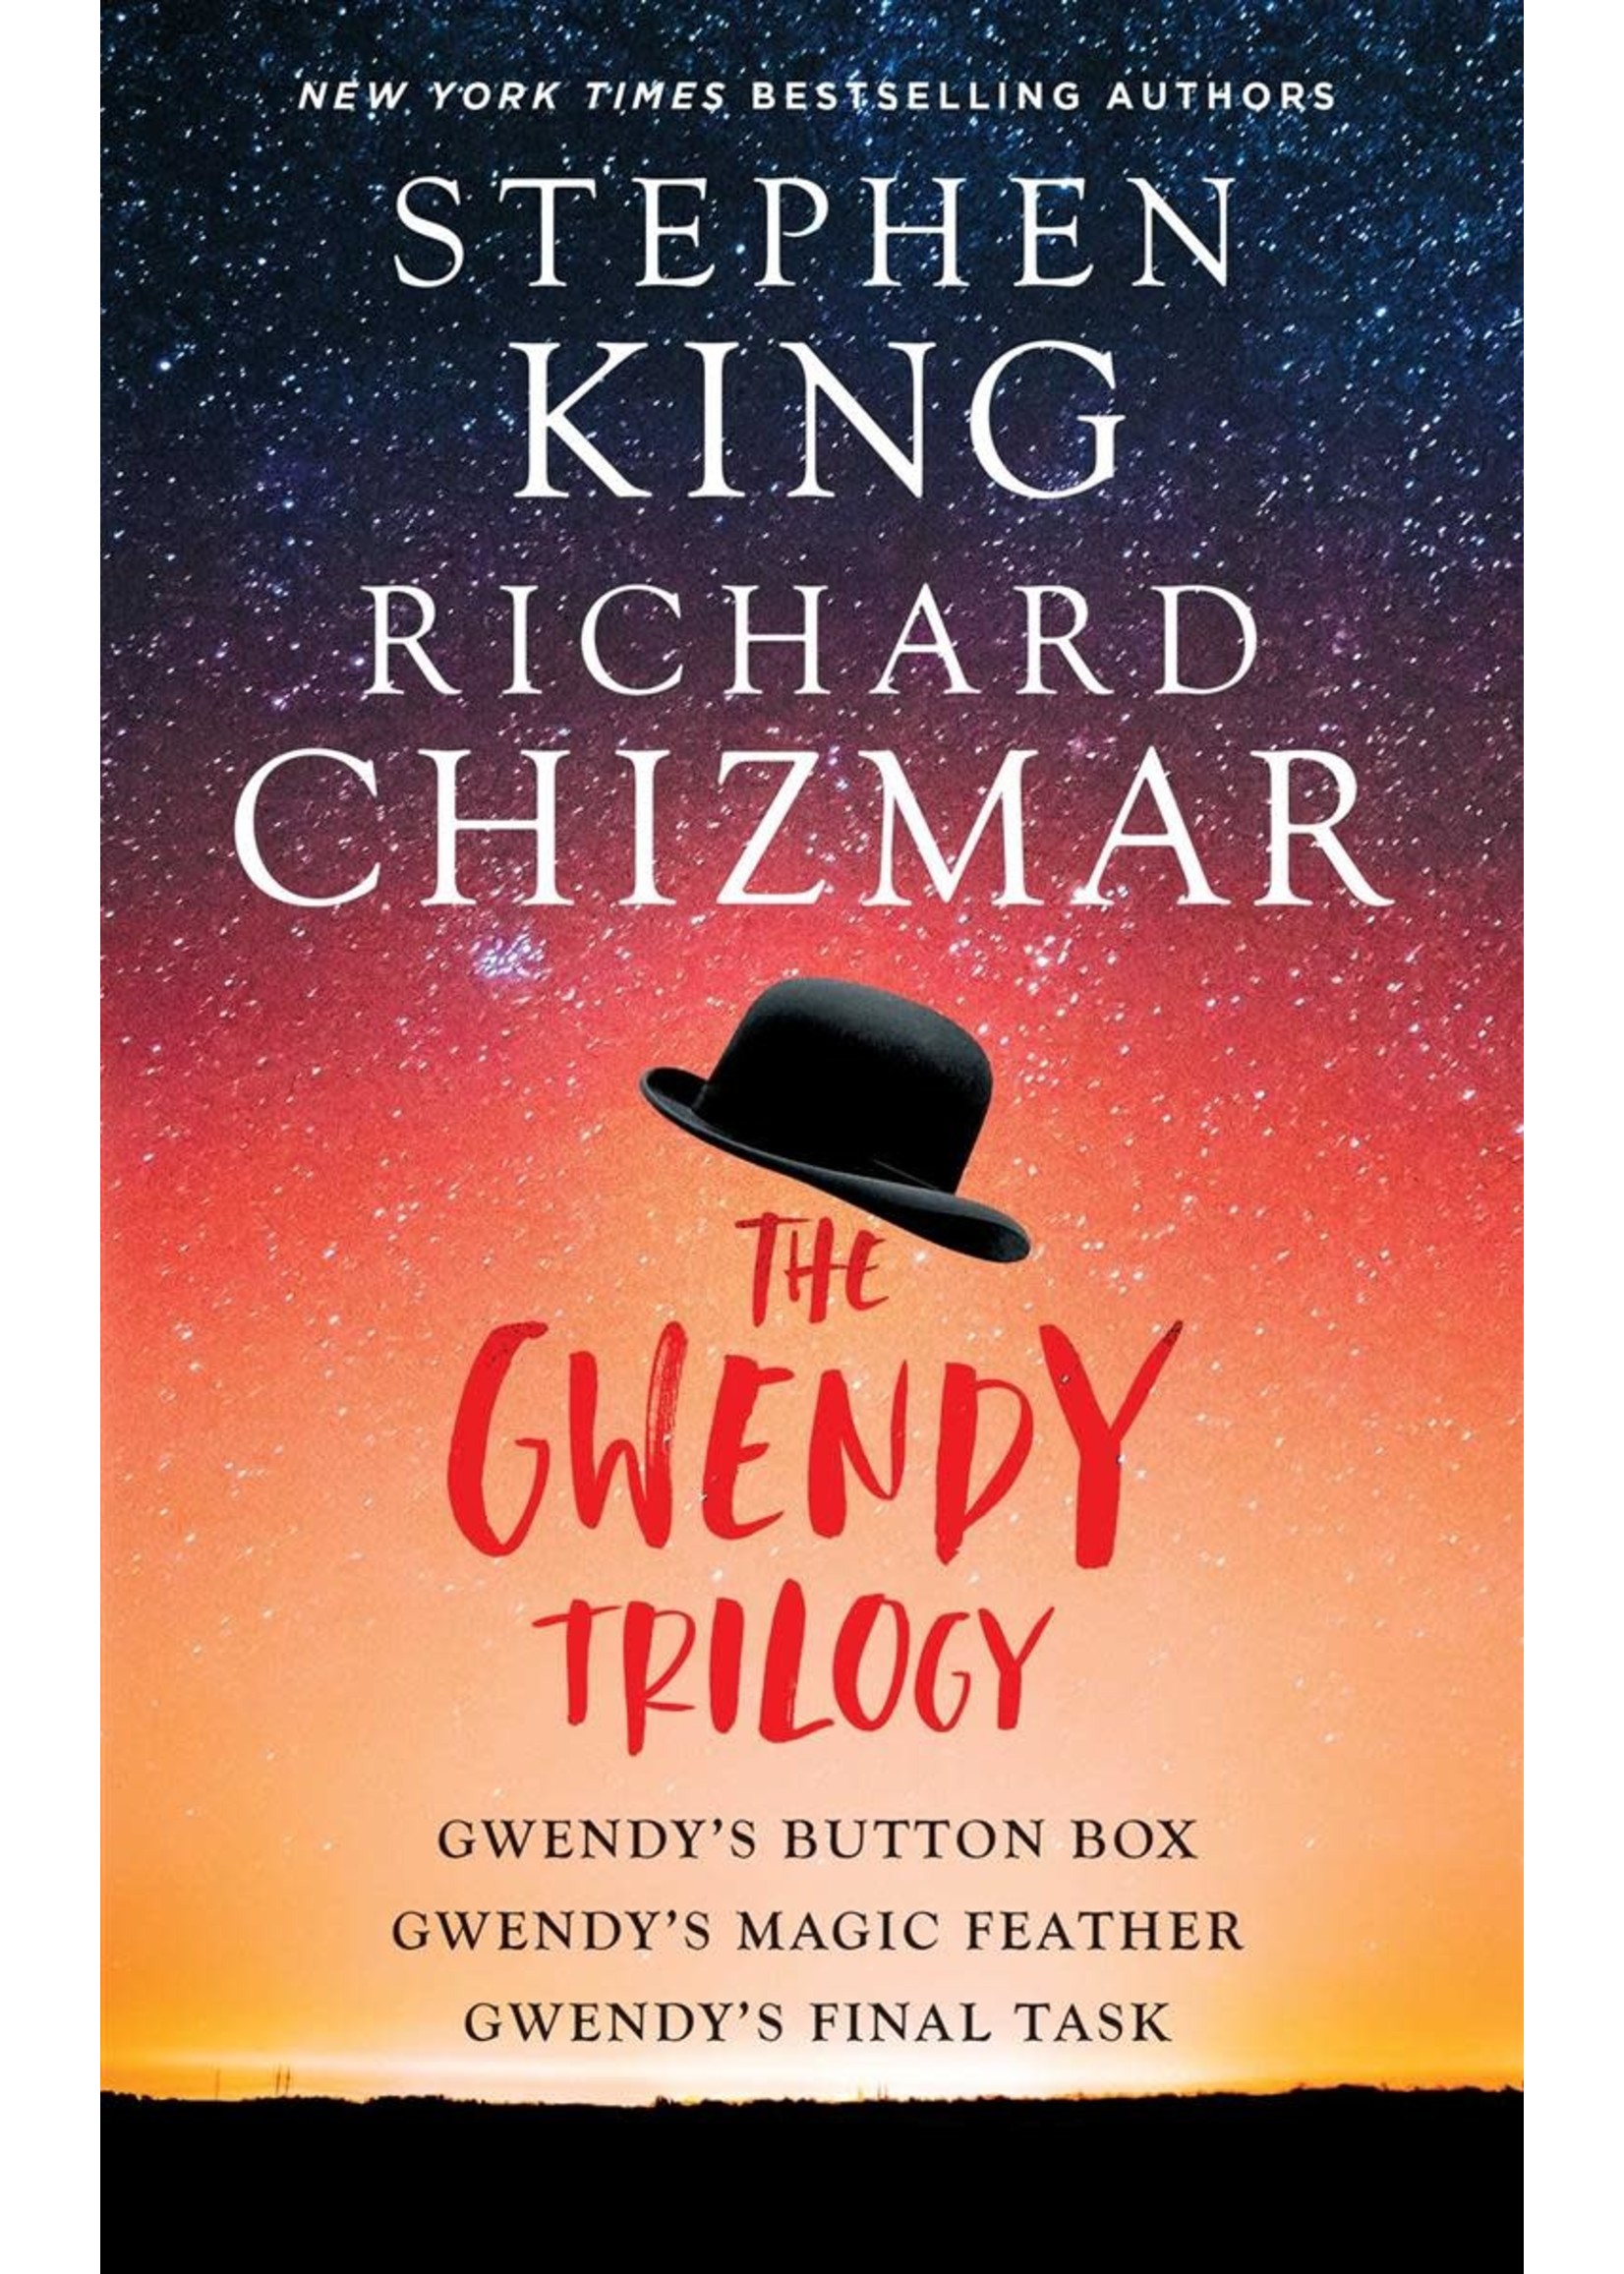 The Gwendy Trilogy: Gwendy's Button Box, Gwendy's Magic Feather, Gwendy's Final Task, Boxed Set by Stephen King, Richard Chizmar